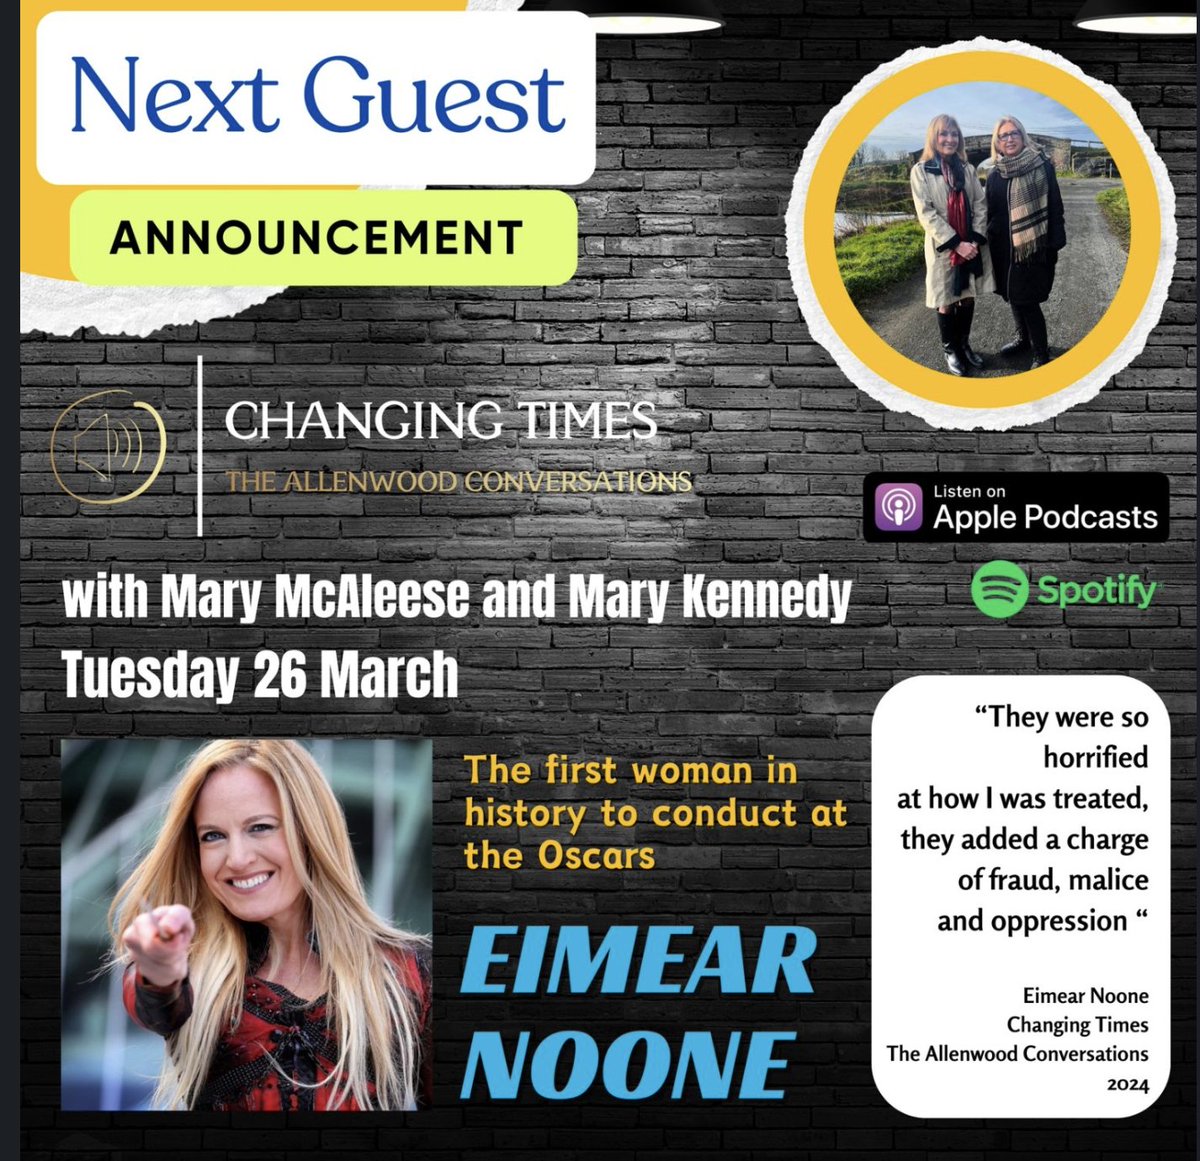 Broadcasting tomorrow on @ApplePodcasts + @Spotify A deep-dive on all things life w/ two-term former Irish President, icon, lawyer, Mary McAleese + legendary broadcaster Mary Kennedy. This was a really memorable day for me: 'Changing Times: the Allenwood Conversations'